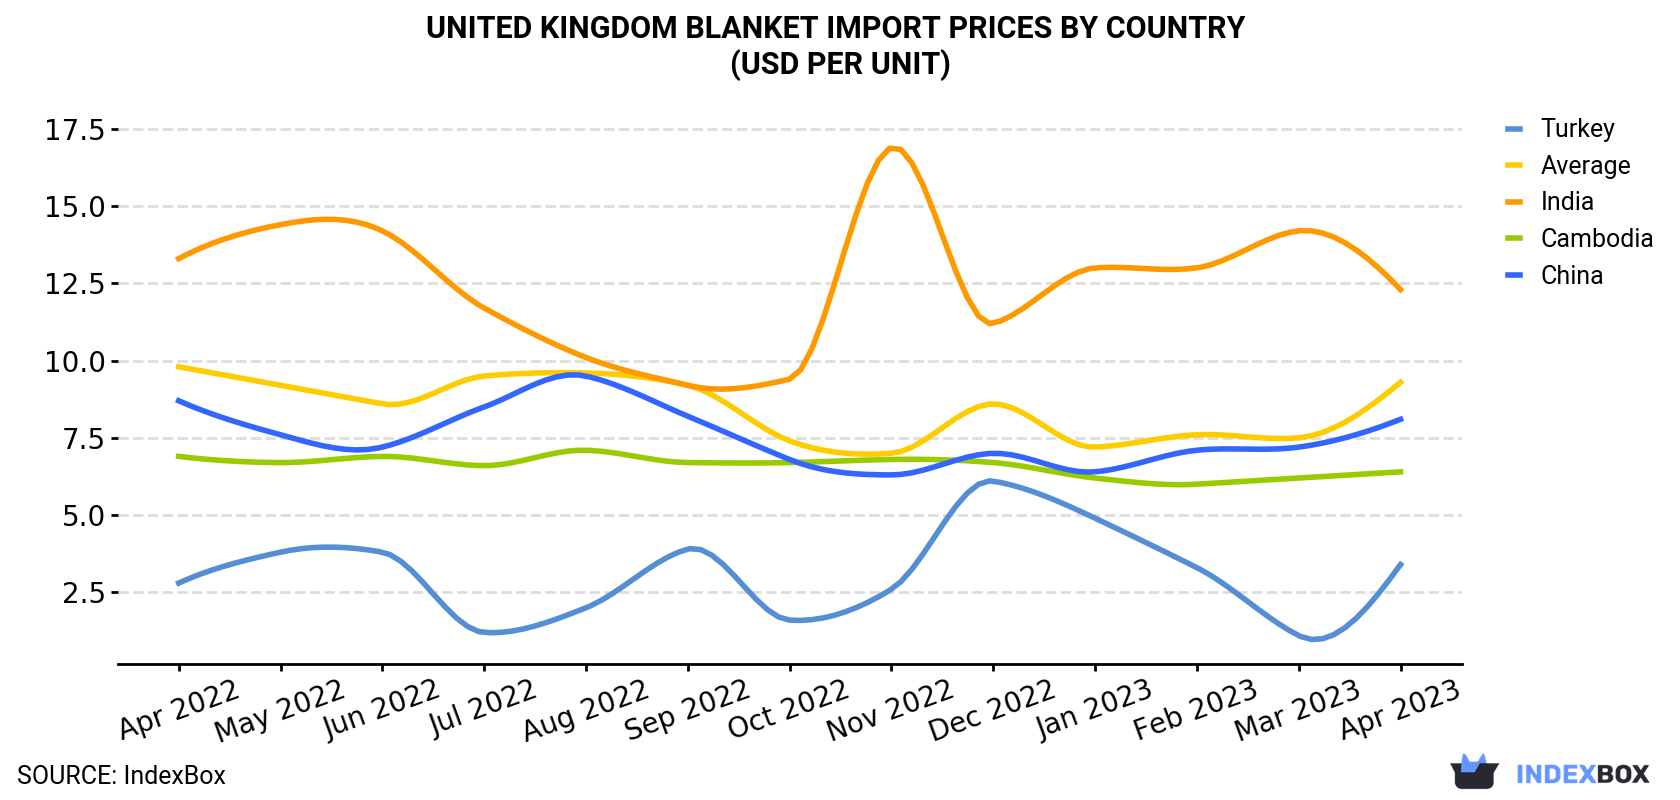 United Kingdom Blanket Import Prices By Country (USD Per Unit)